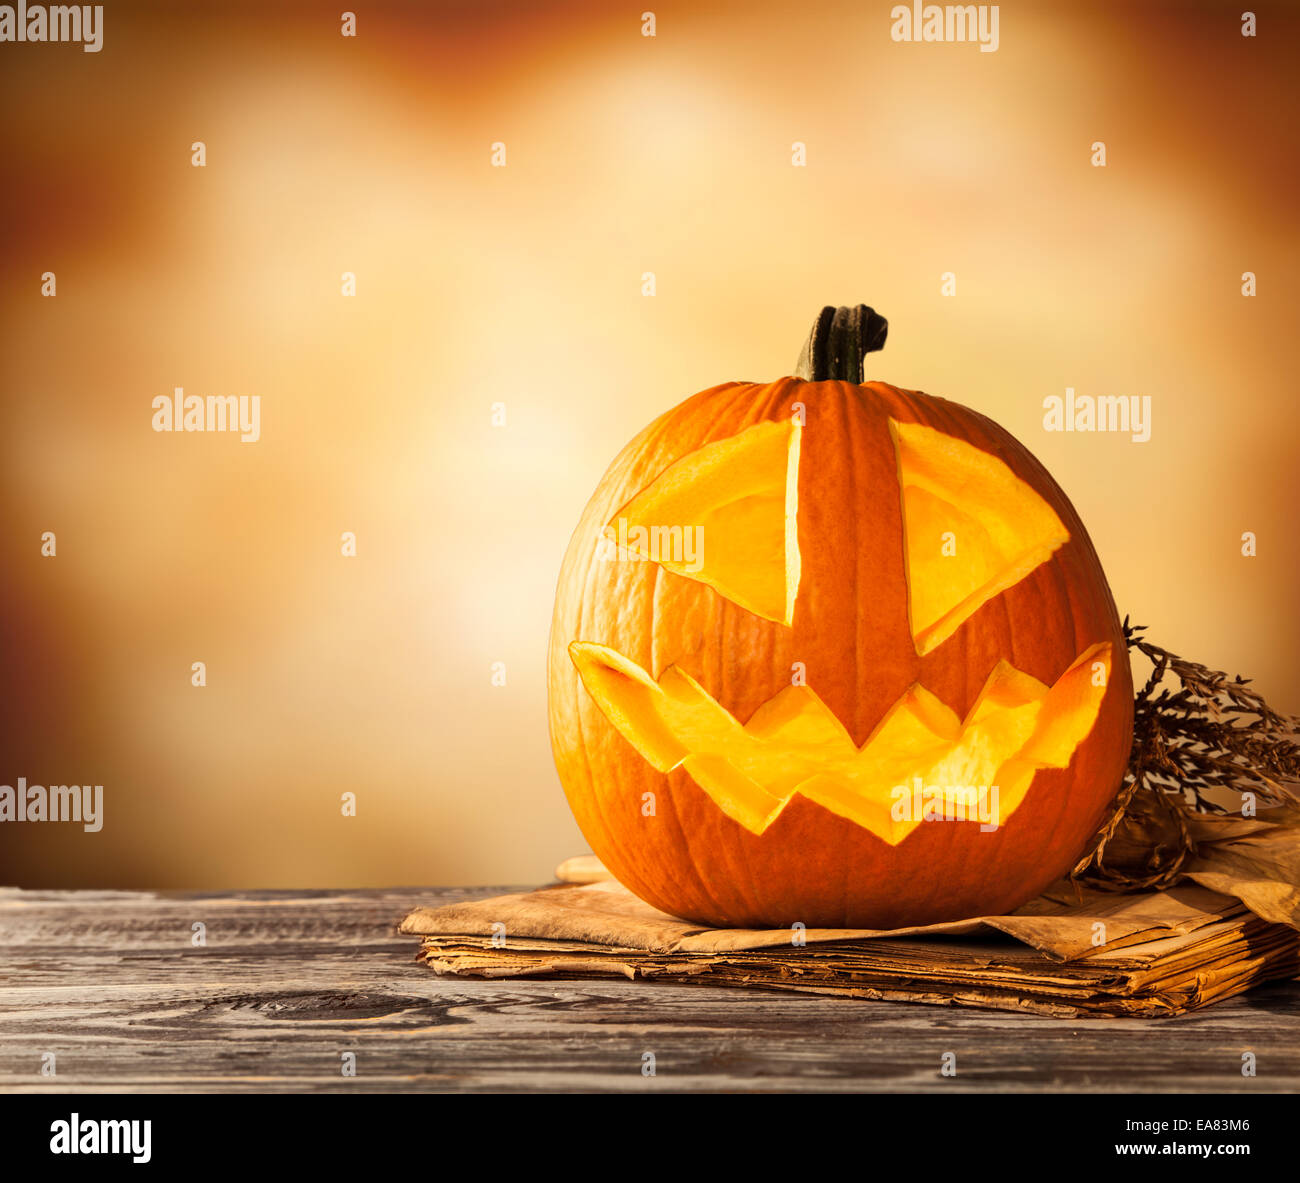 Evil halloween pumpkin on wood with free space for text Stock Photo